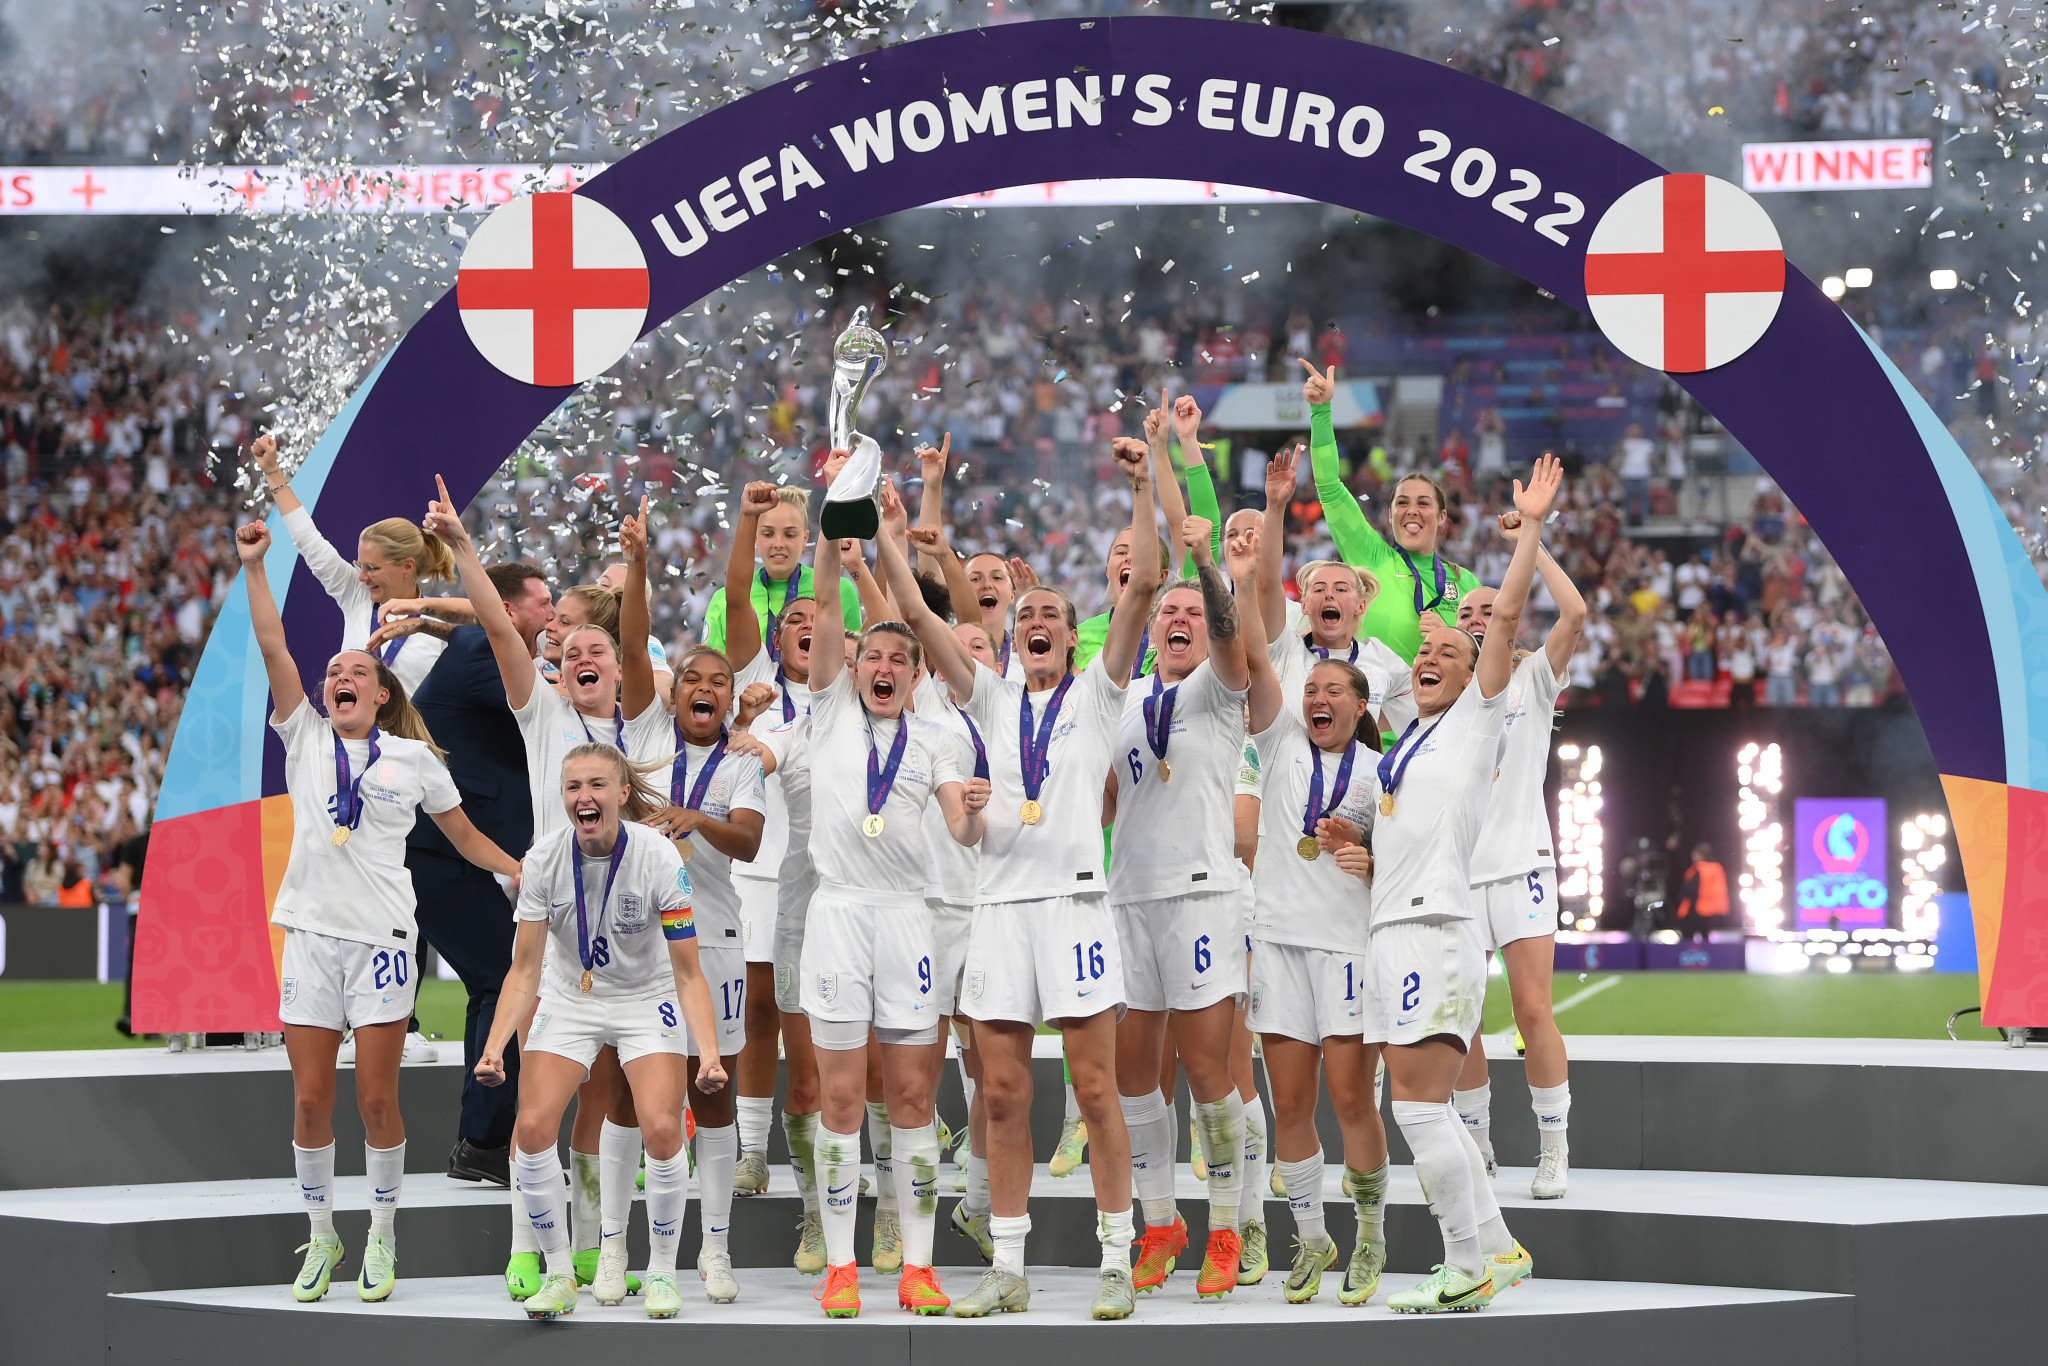 A capacity crowd watched England's women win the European Championship final at Wembley in 2022 ©Getty Images